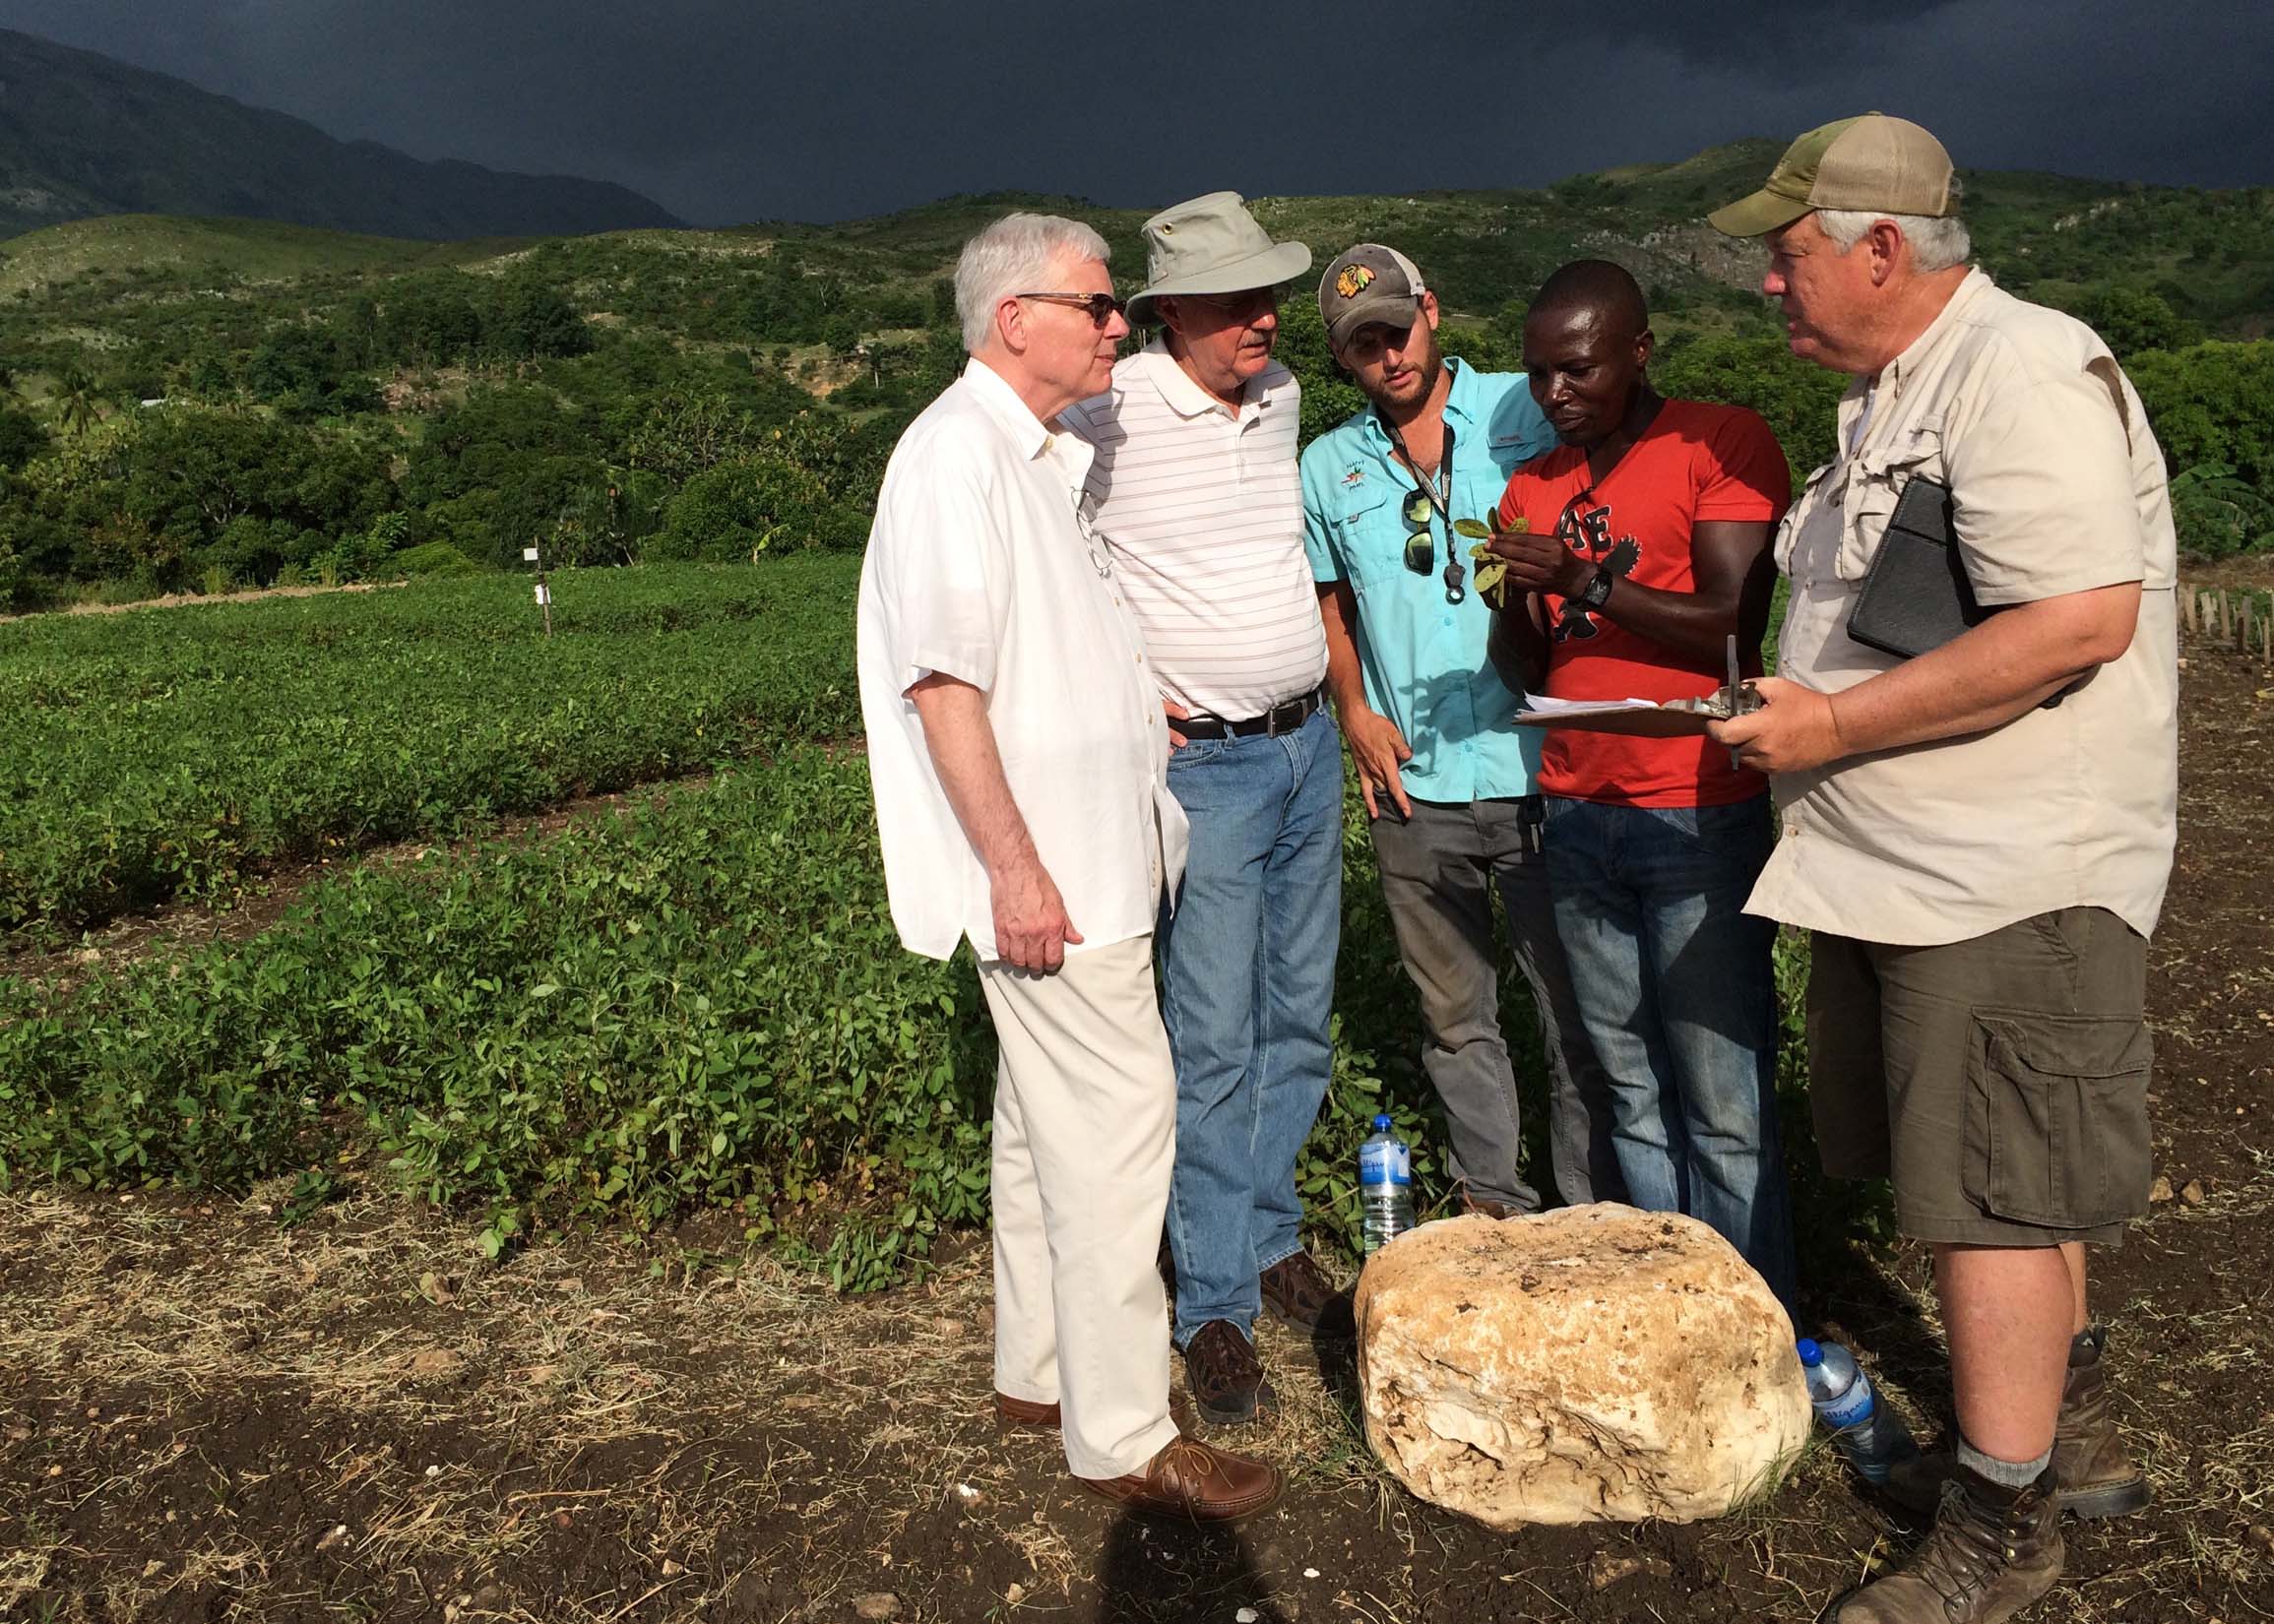 Left to Right: UGA College of Agricultural and Environmental Science Dean J. Scott Angle, PMIL Director Dave Hoisington, Food for Kids Ag Research Specialist Will Sheard, Meds and Food for Kids agronomist Jean Phillipe Dorzin and UGA peanut pathologist Bob Kemerait.